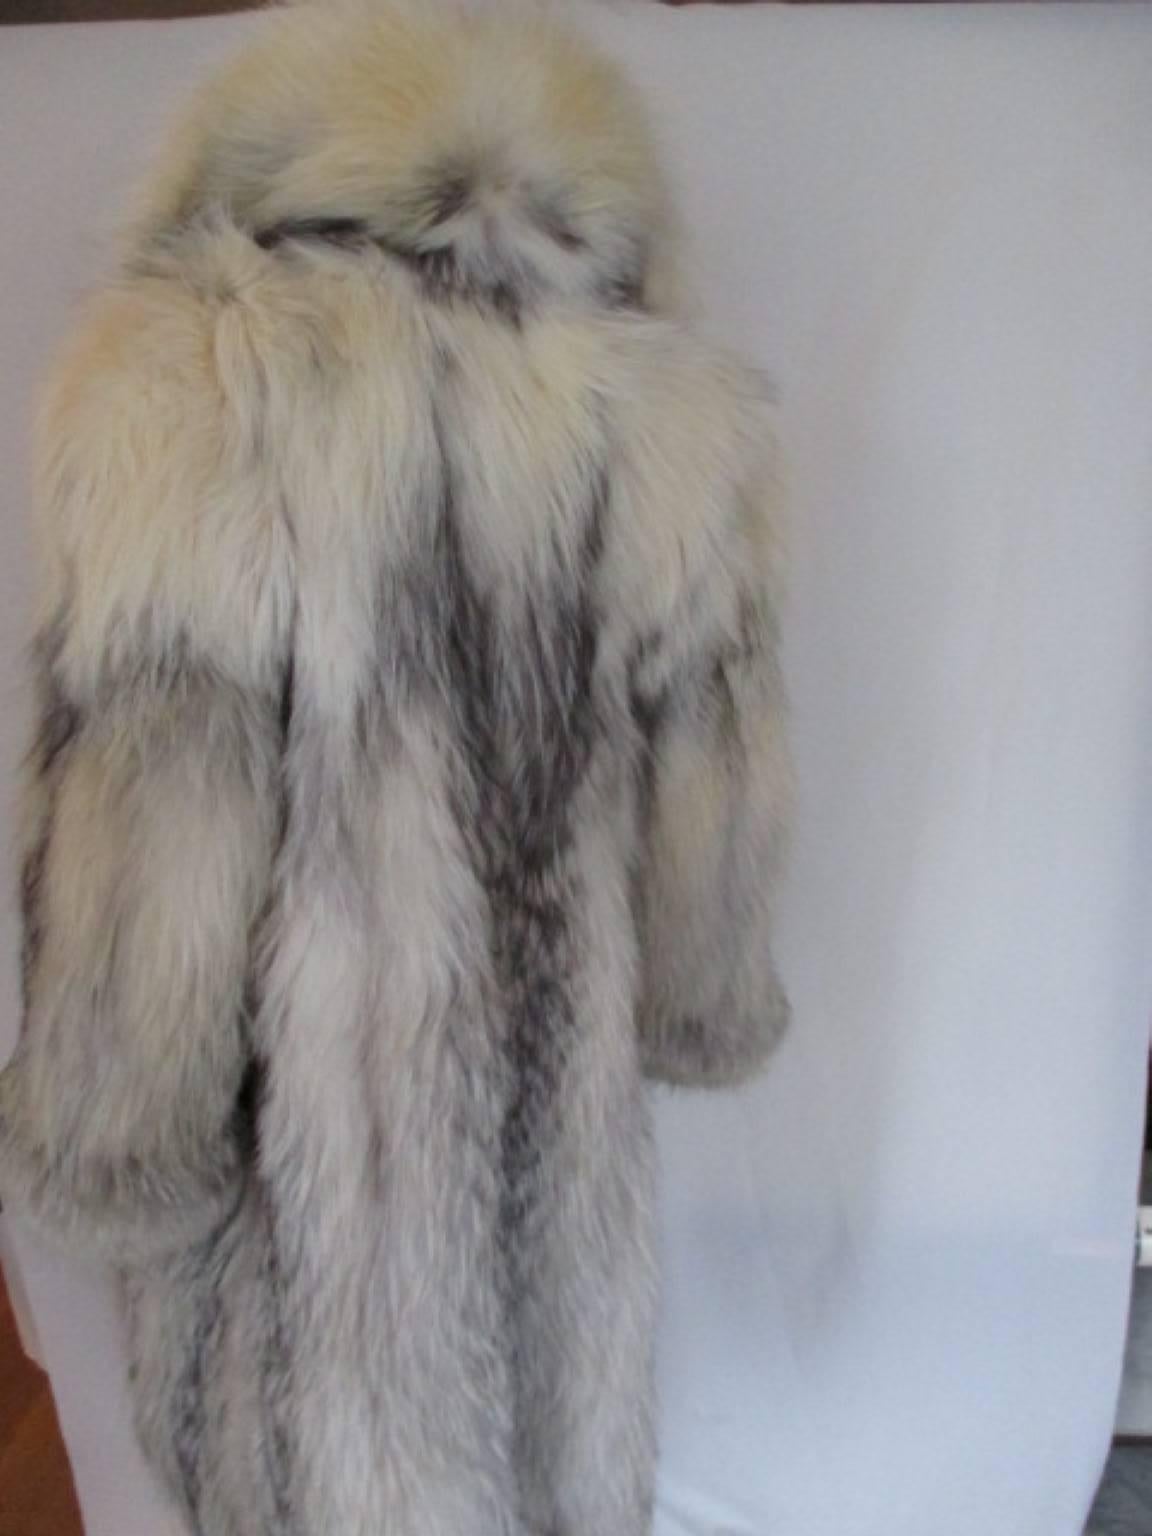 This vintage fur coat is from furrier Alper-Richman furs LTD , Chicago.
It has 3 closing hooks, 2 pockets and an inside zipper pocket.
The former owner is signed Alice in the lining.
Its in excellent vintage condition with some minimum wear at the